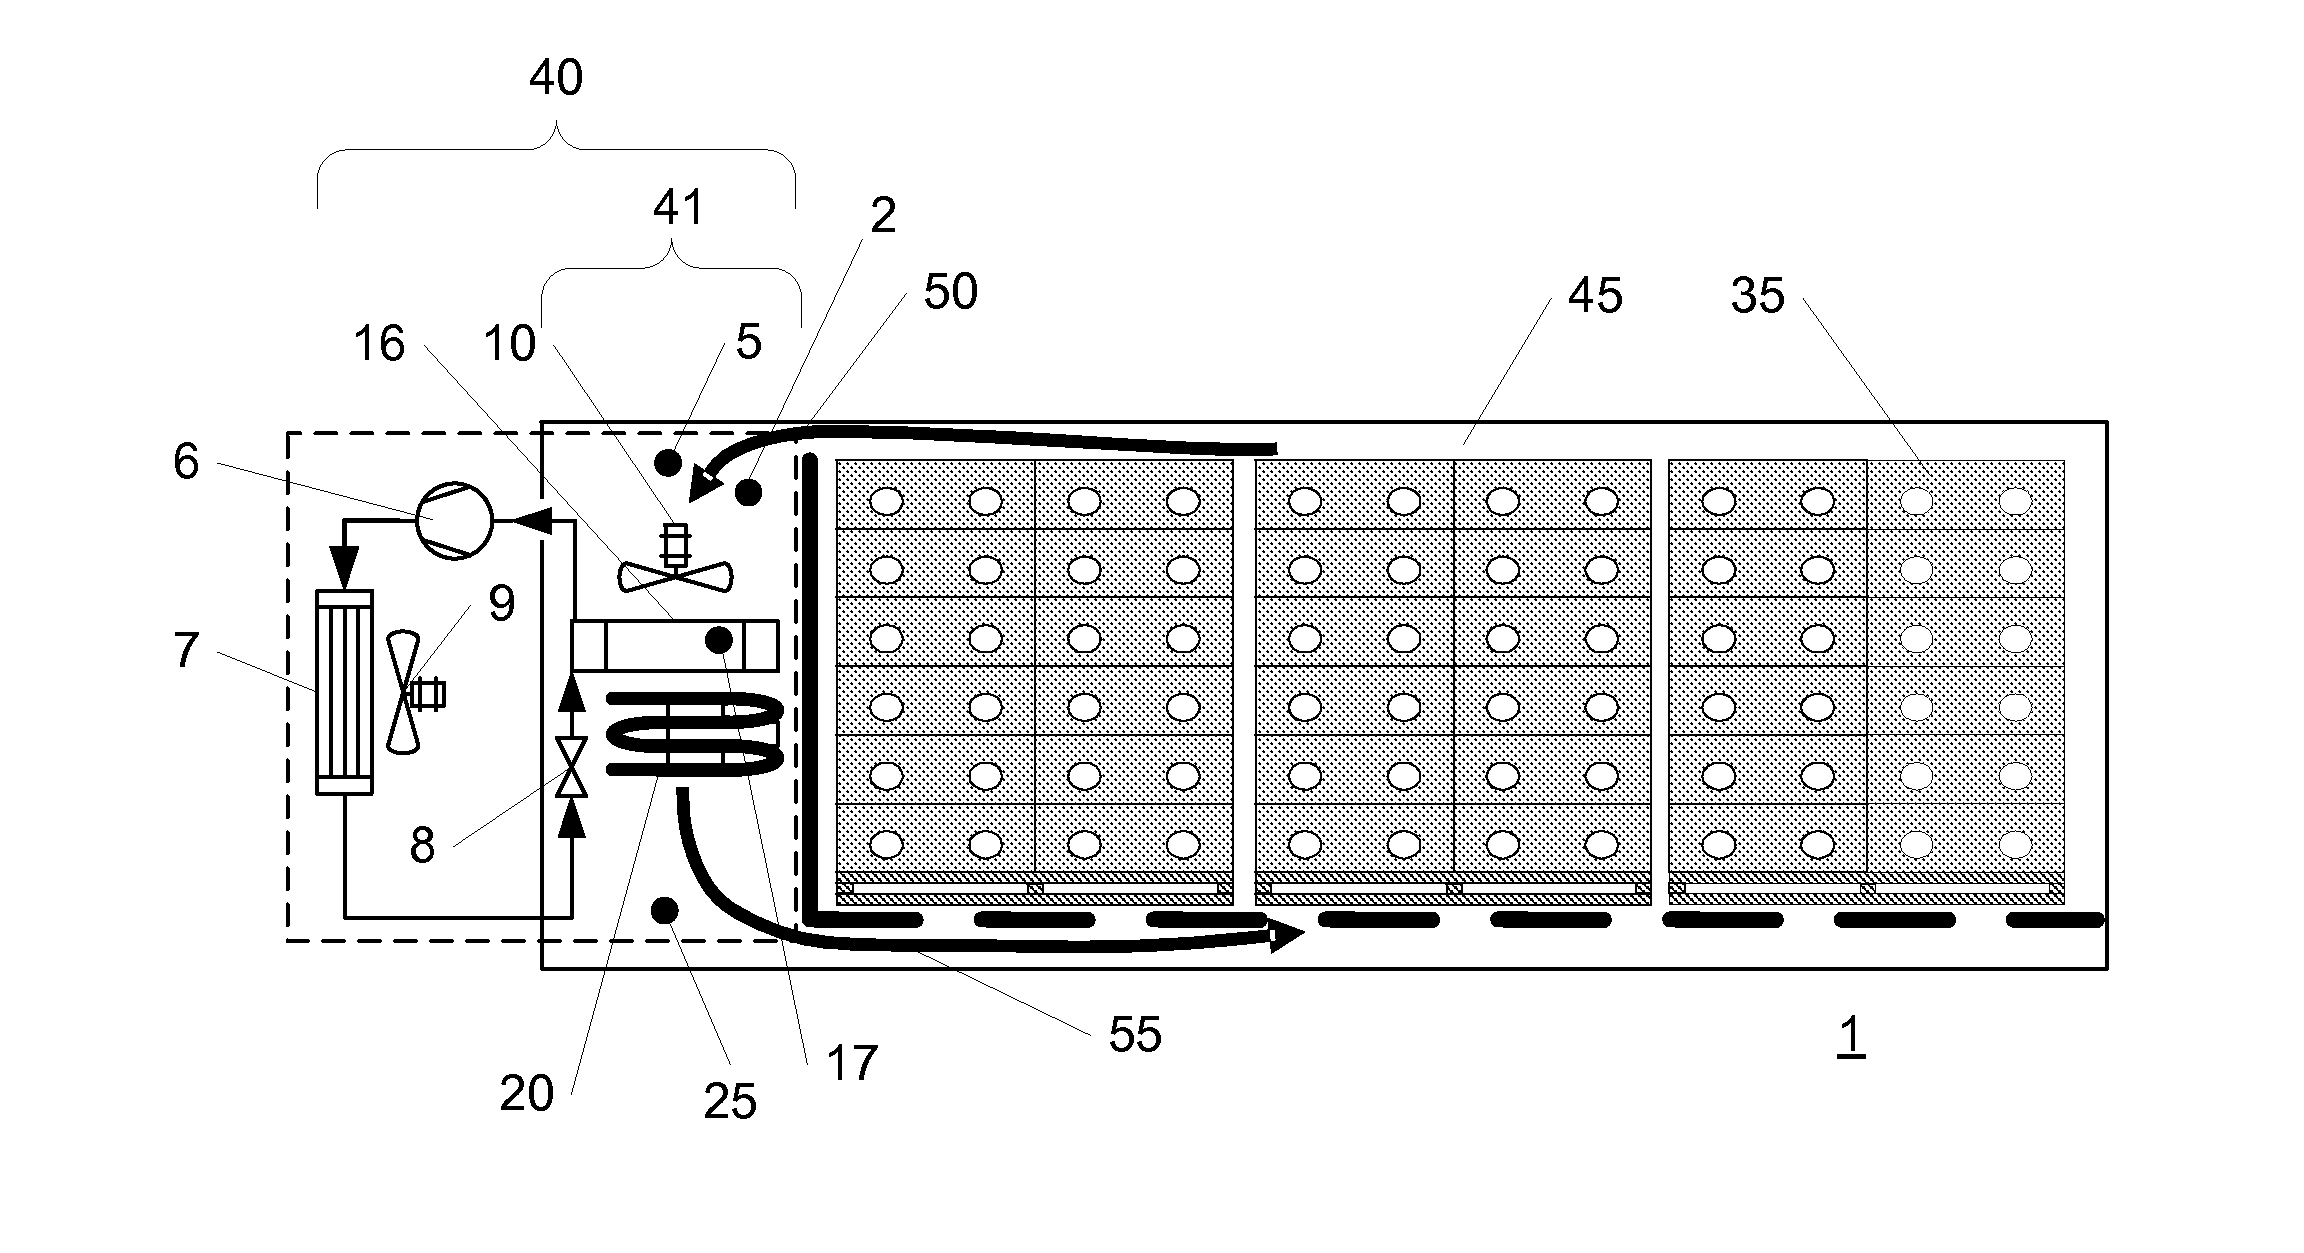 Humidity control in a refrigerated transport container with an intermittently operated compressor